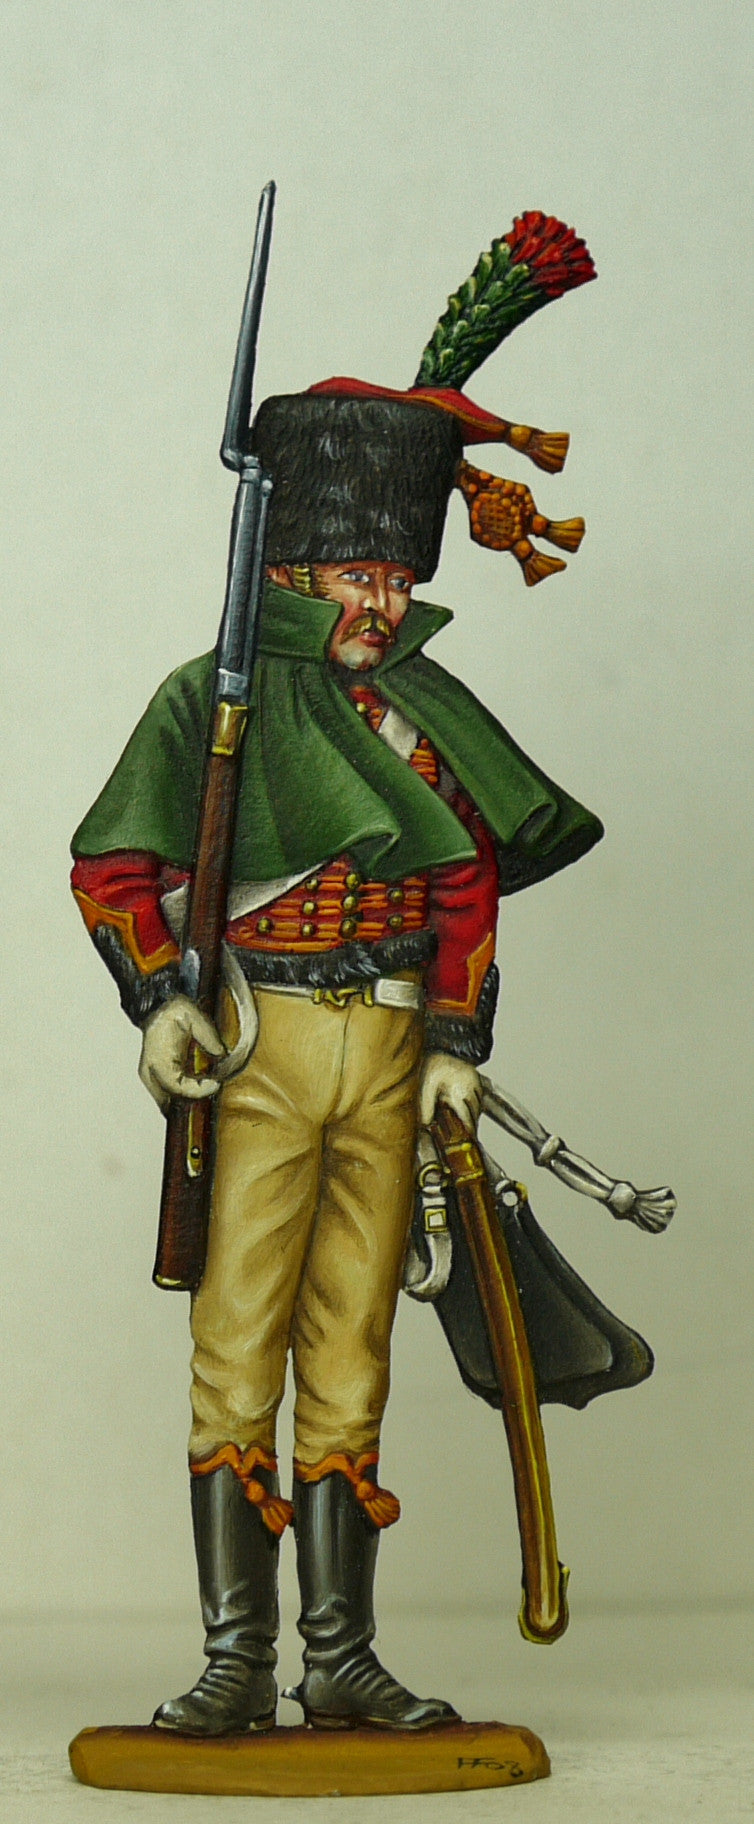 Guard Chasseur on Escorte duty - Glorious Empires-Historical Miniatures  